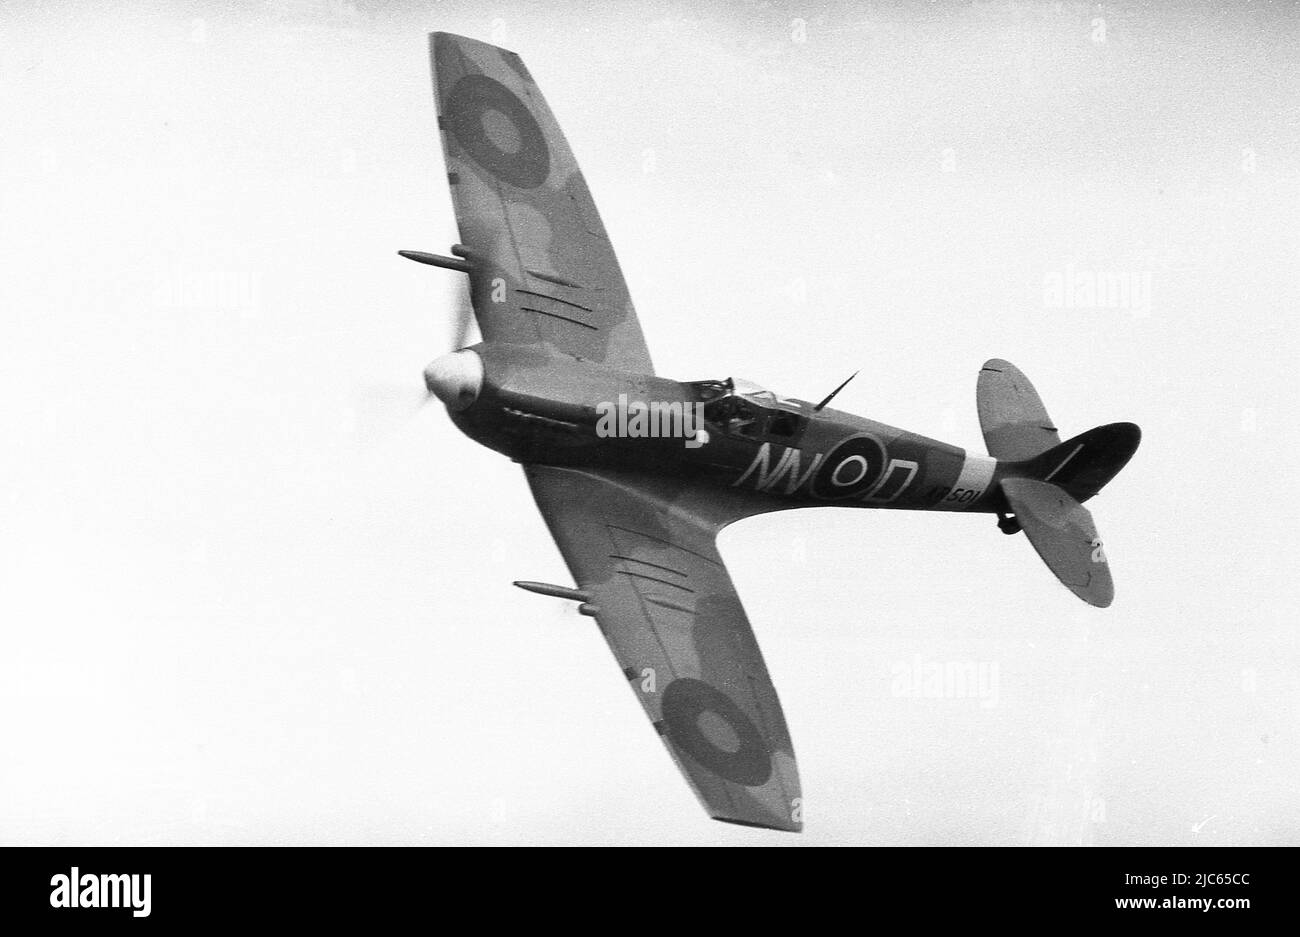 1970, historical, RAF Supermarine Spitfire NN-N in flight in the air over Shuttleworth, England, UK. Built at Castle Bromwich, West Midlands, this Spitfire was sent to the 310 (Czech) Squadron and coded 'NN-N'. No.310 Squadron RAF was a Czechoslavk-manned fighter squadron of the RAF in WW2 and the first to be manned by foreign nationals. The spitfire was transferred to the Czech Air Force in 1945 and currently resides on display at the National Technical Museum. Stock Photo